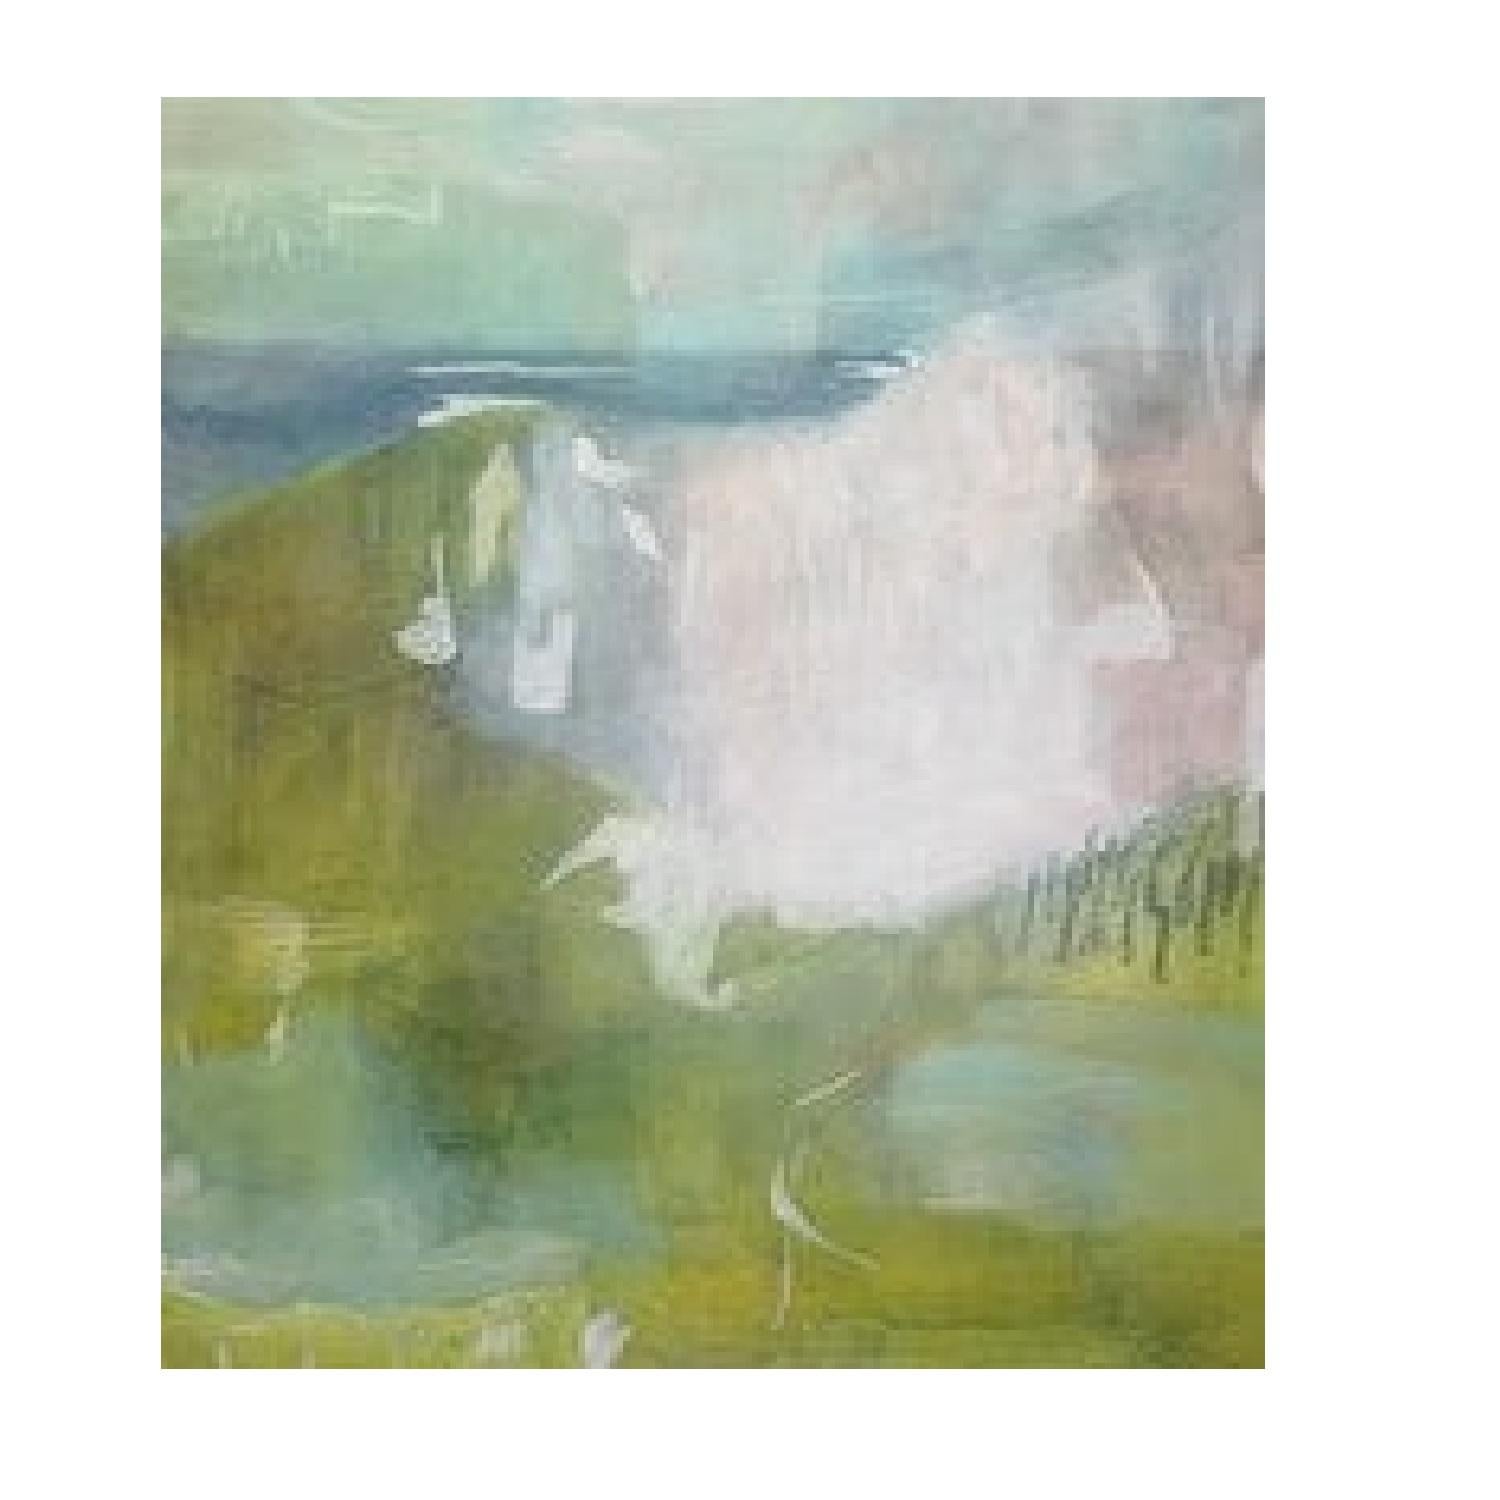 Juanita Bellavance  Abstract Painting - Natural Wonder 1, 2019, abstract expressionism, landscape, green, blue, pink